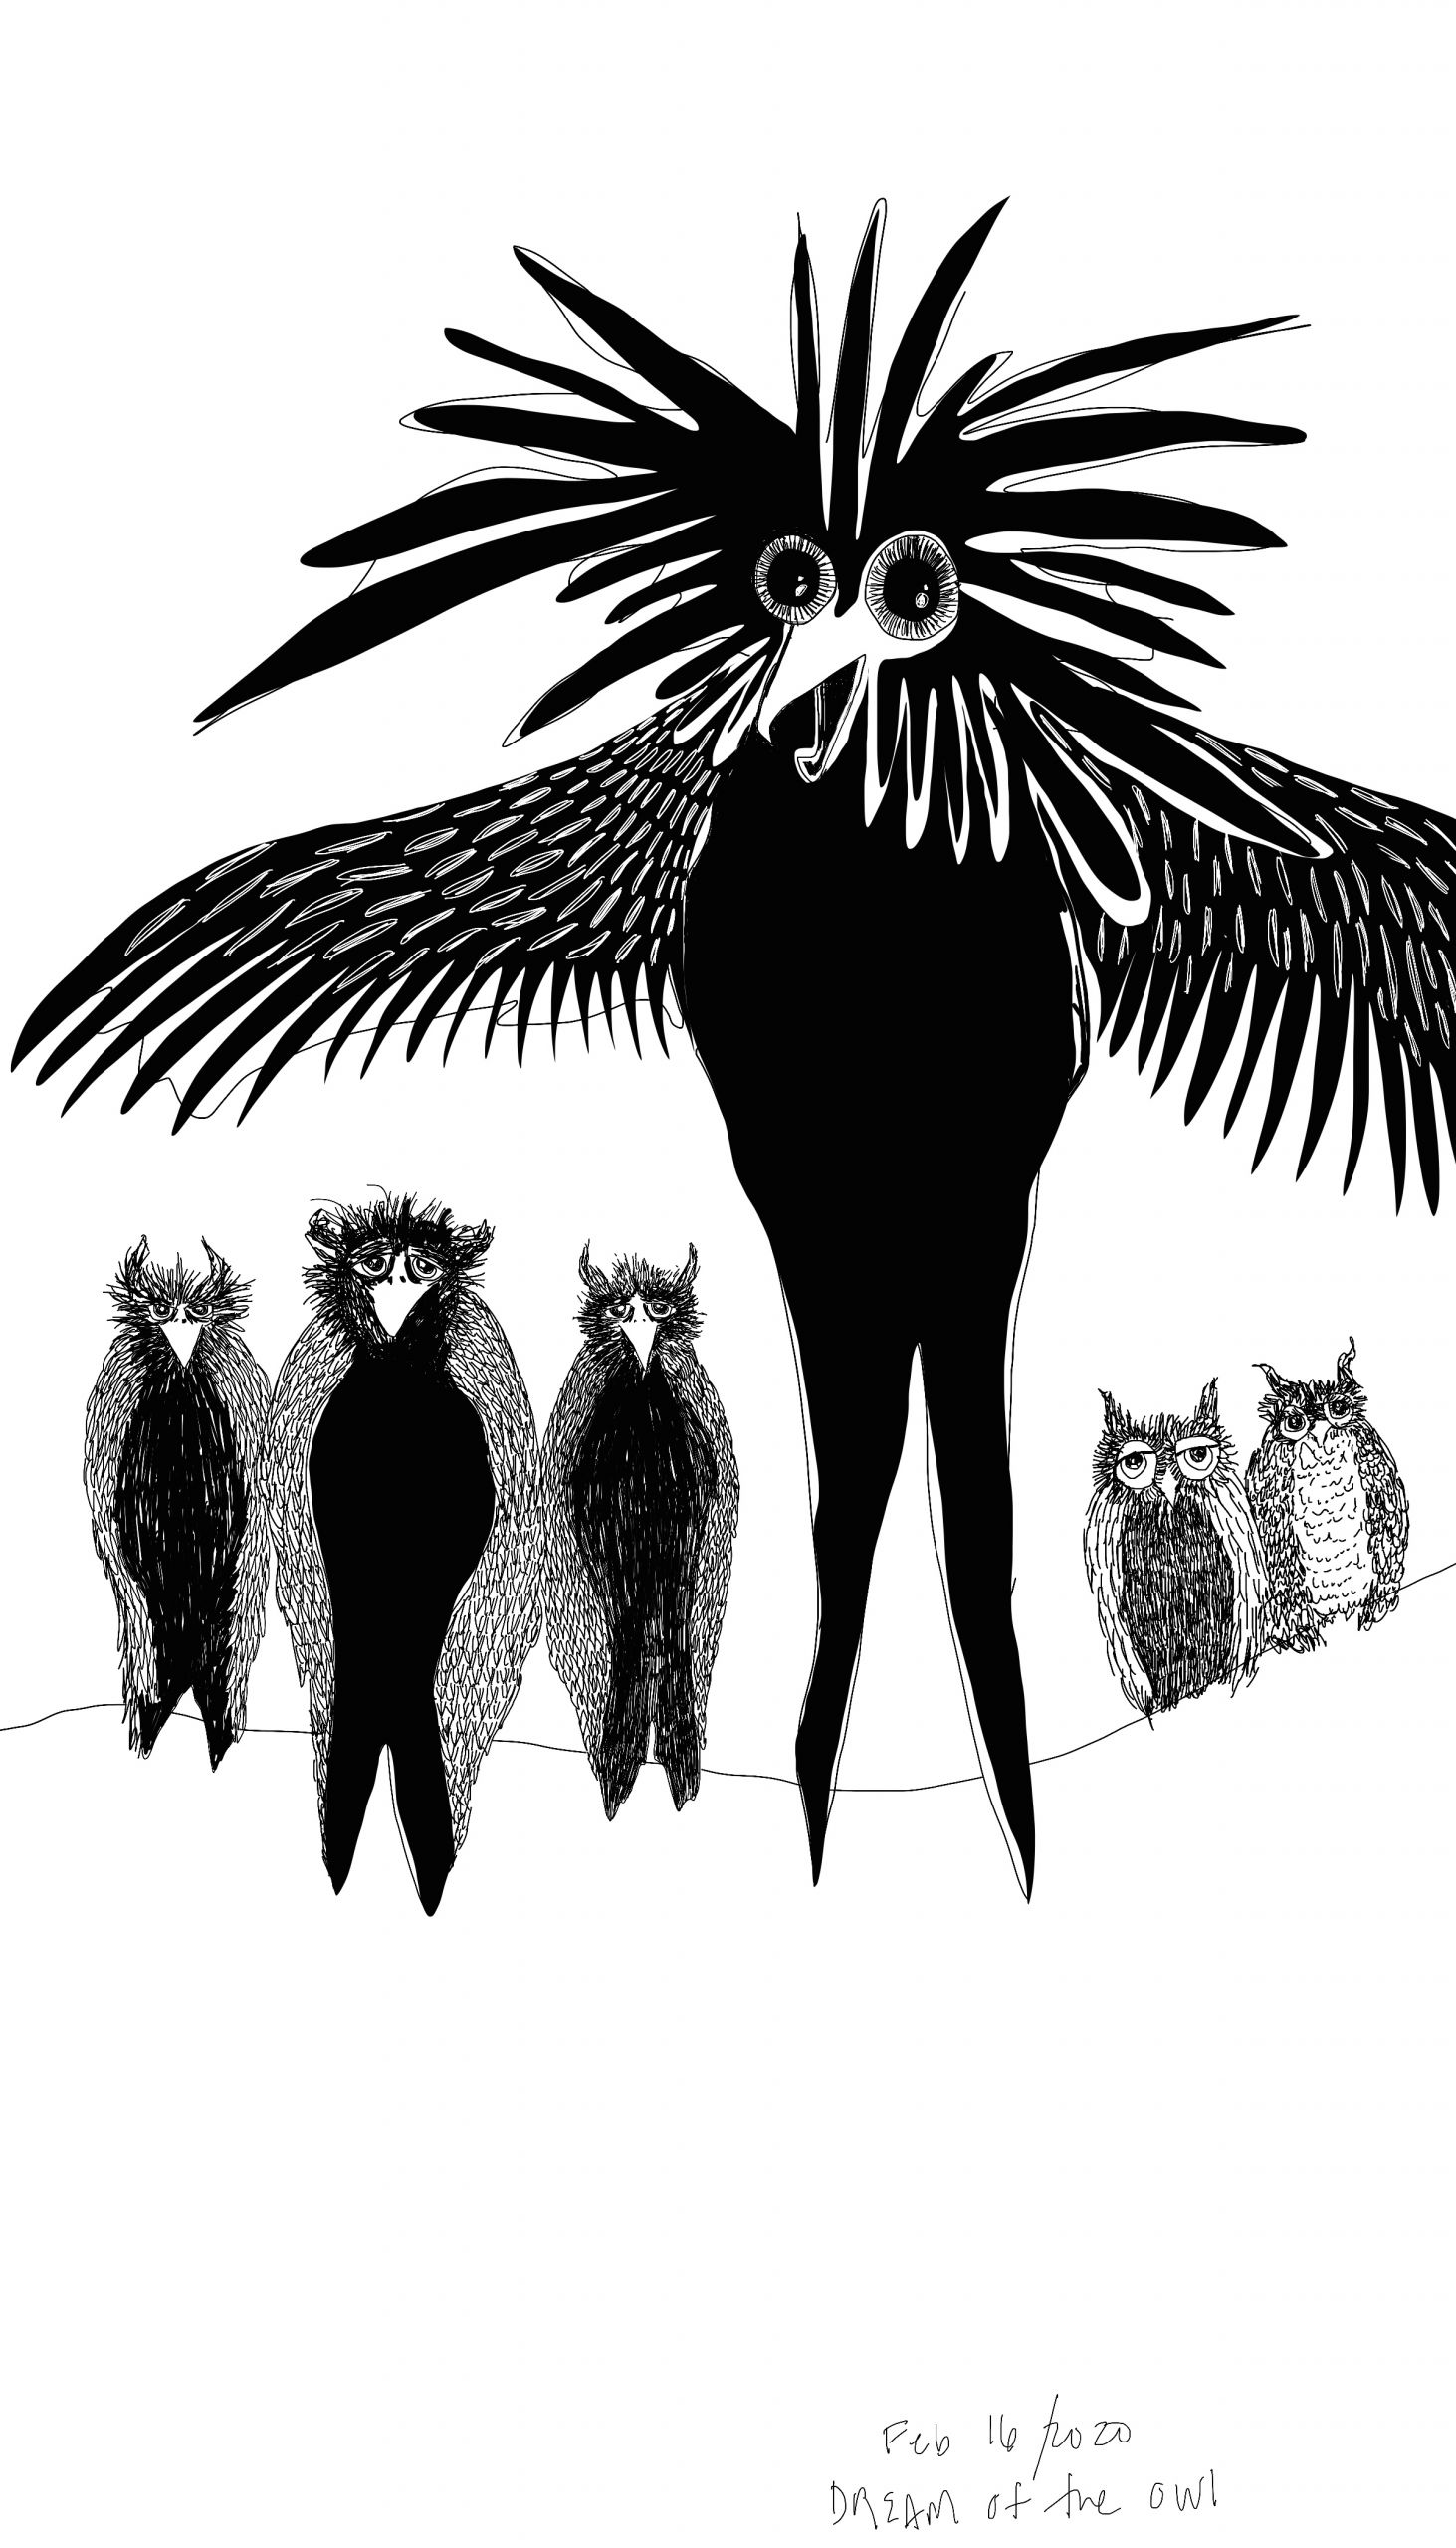 Image of wise owls. Artwork by the author.